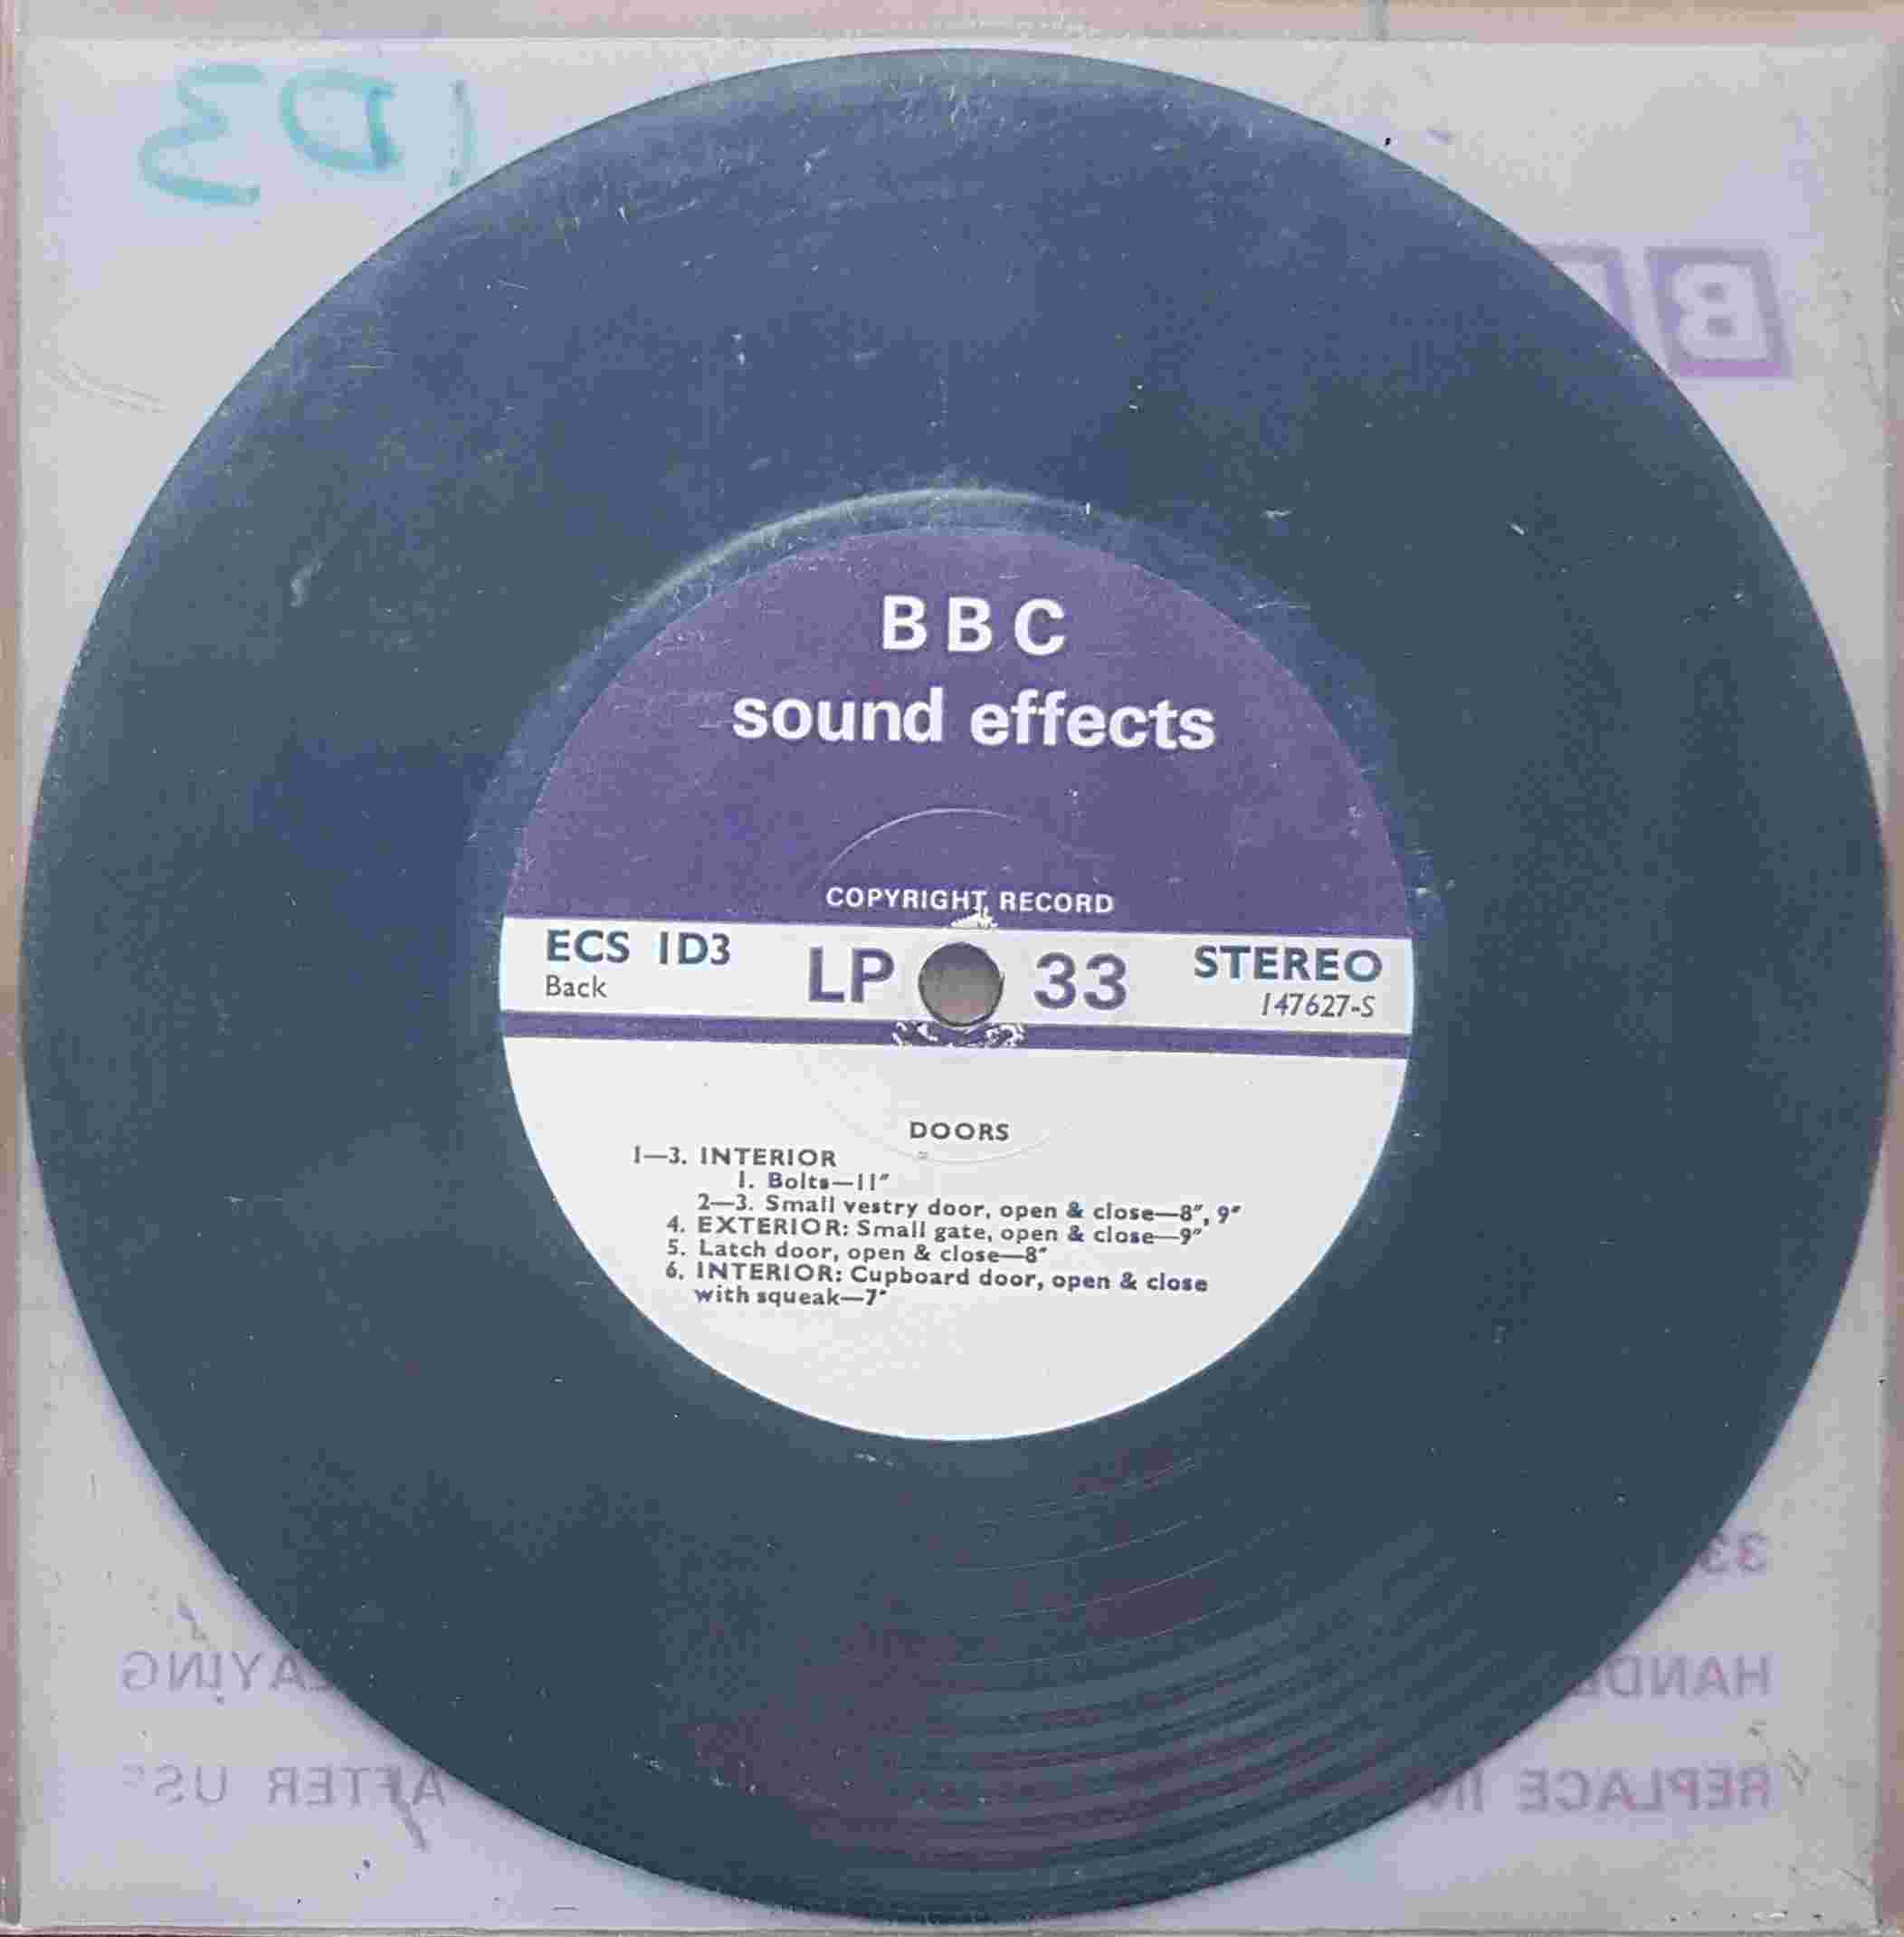 Picture of ECS 1D3 Church doors / Doors by artist Not registered from the BBC records and Tapes library